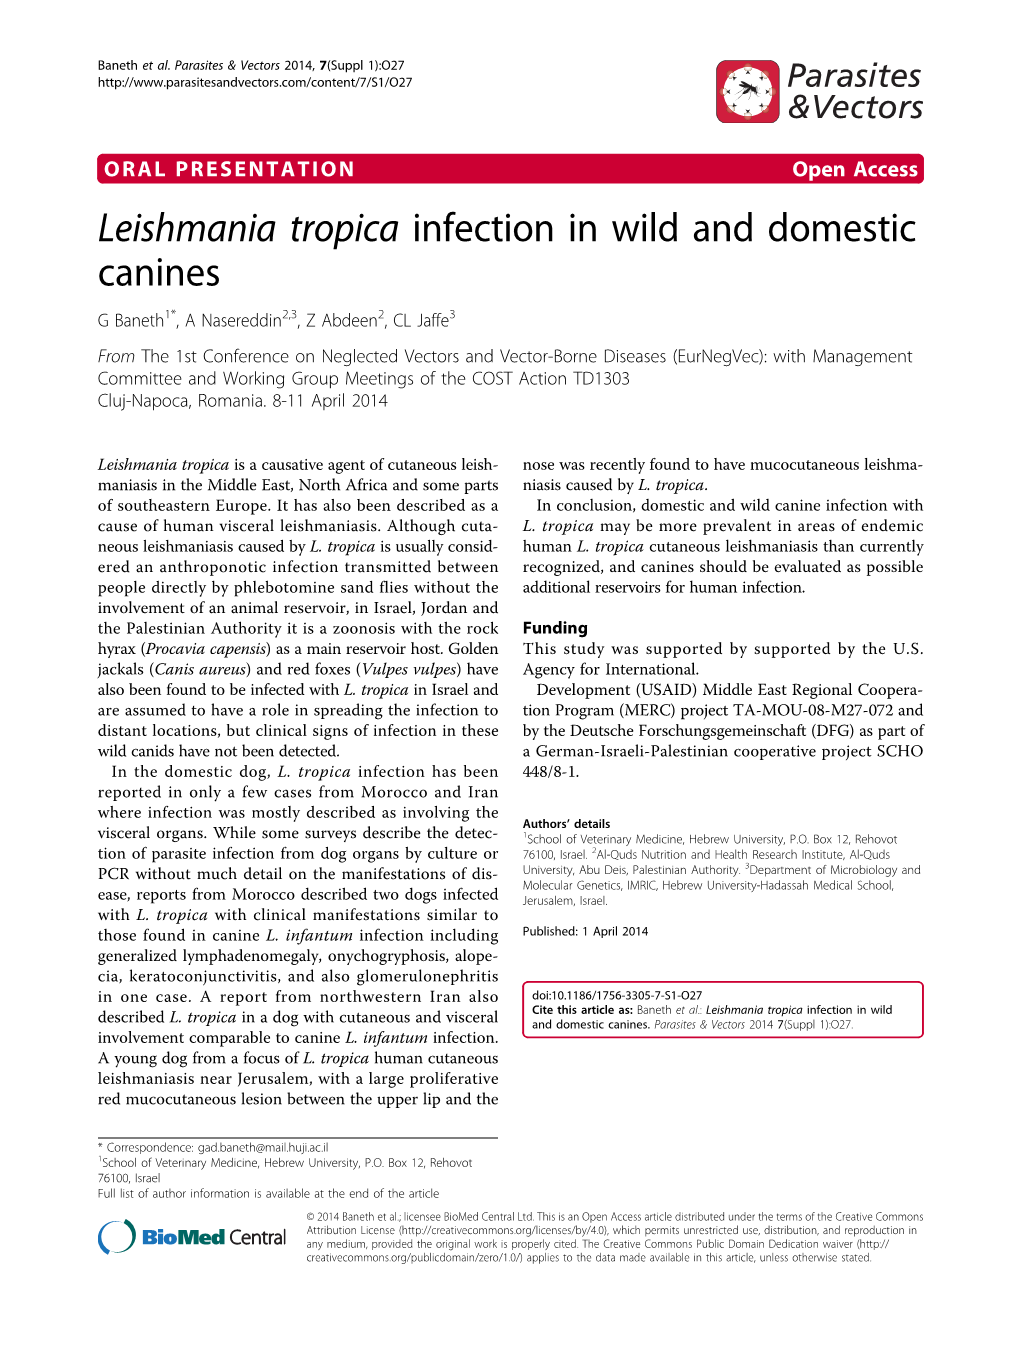 Leishmania Tropica Infection in Wild and Domestic Canines